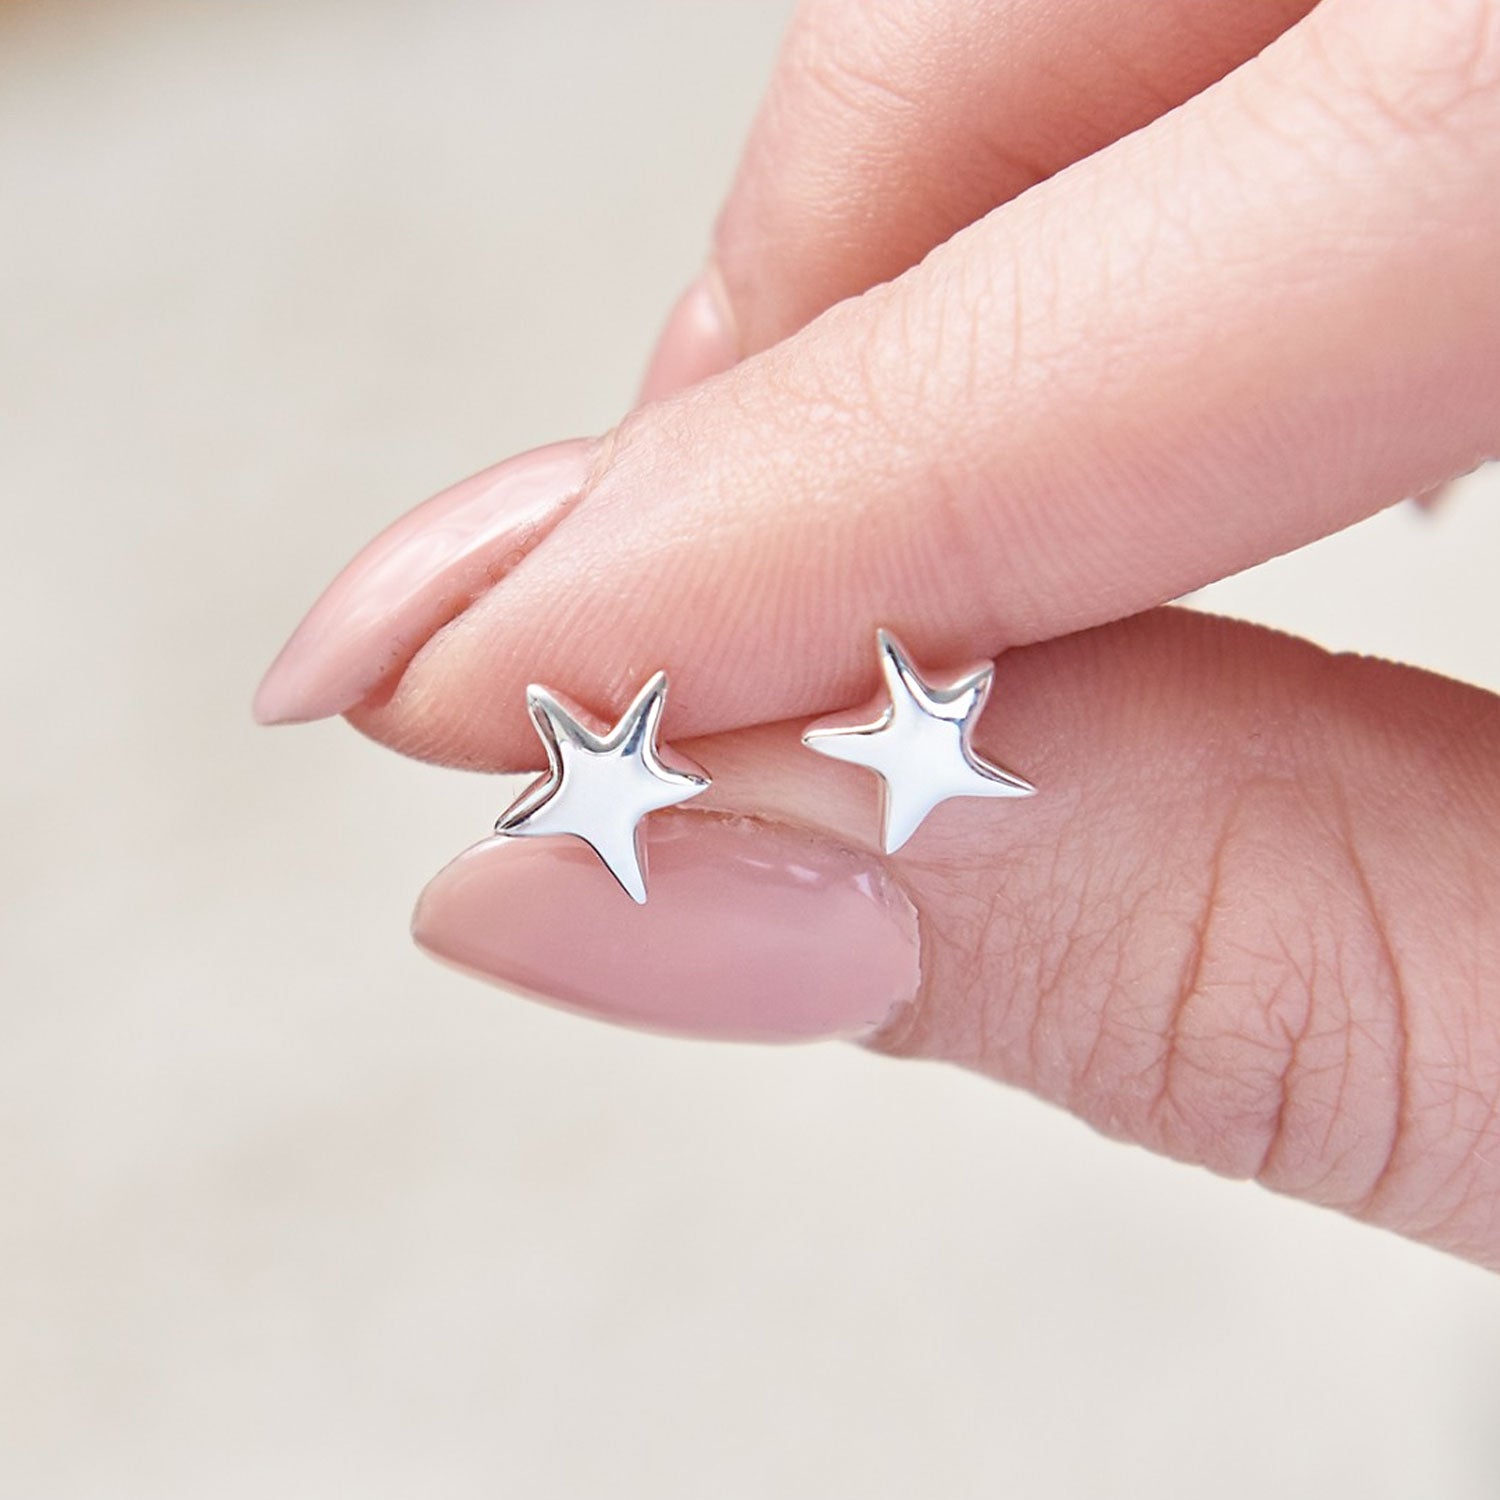 This beautiful, organic shaped pair of silver star studs from designer Scarlett Jewellery